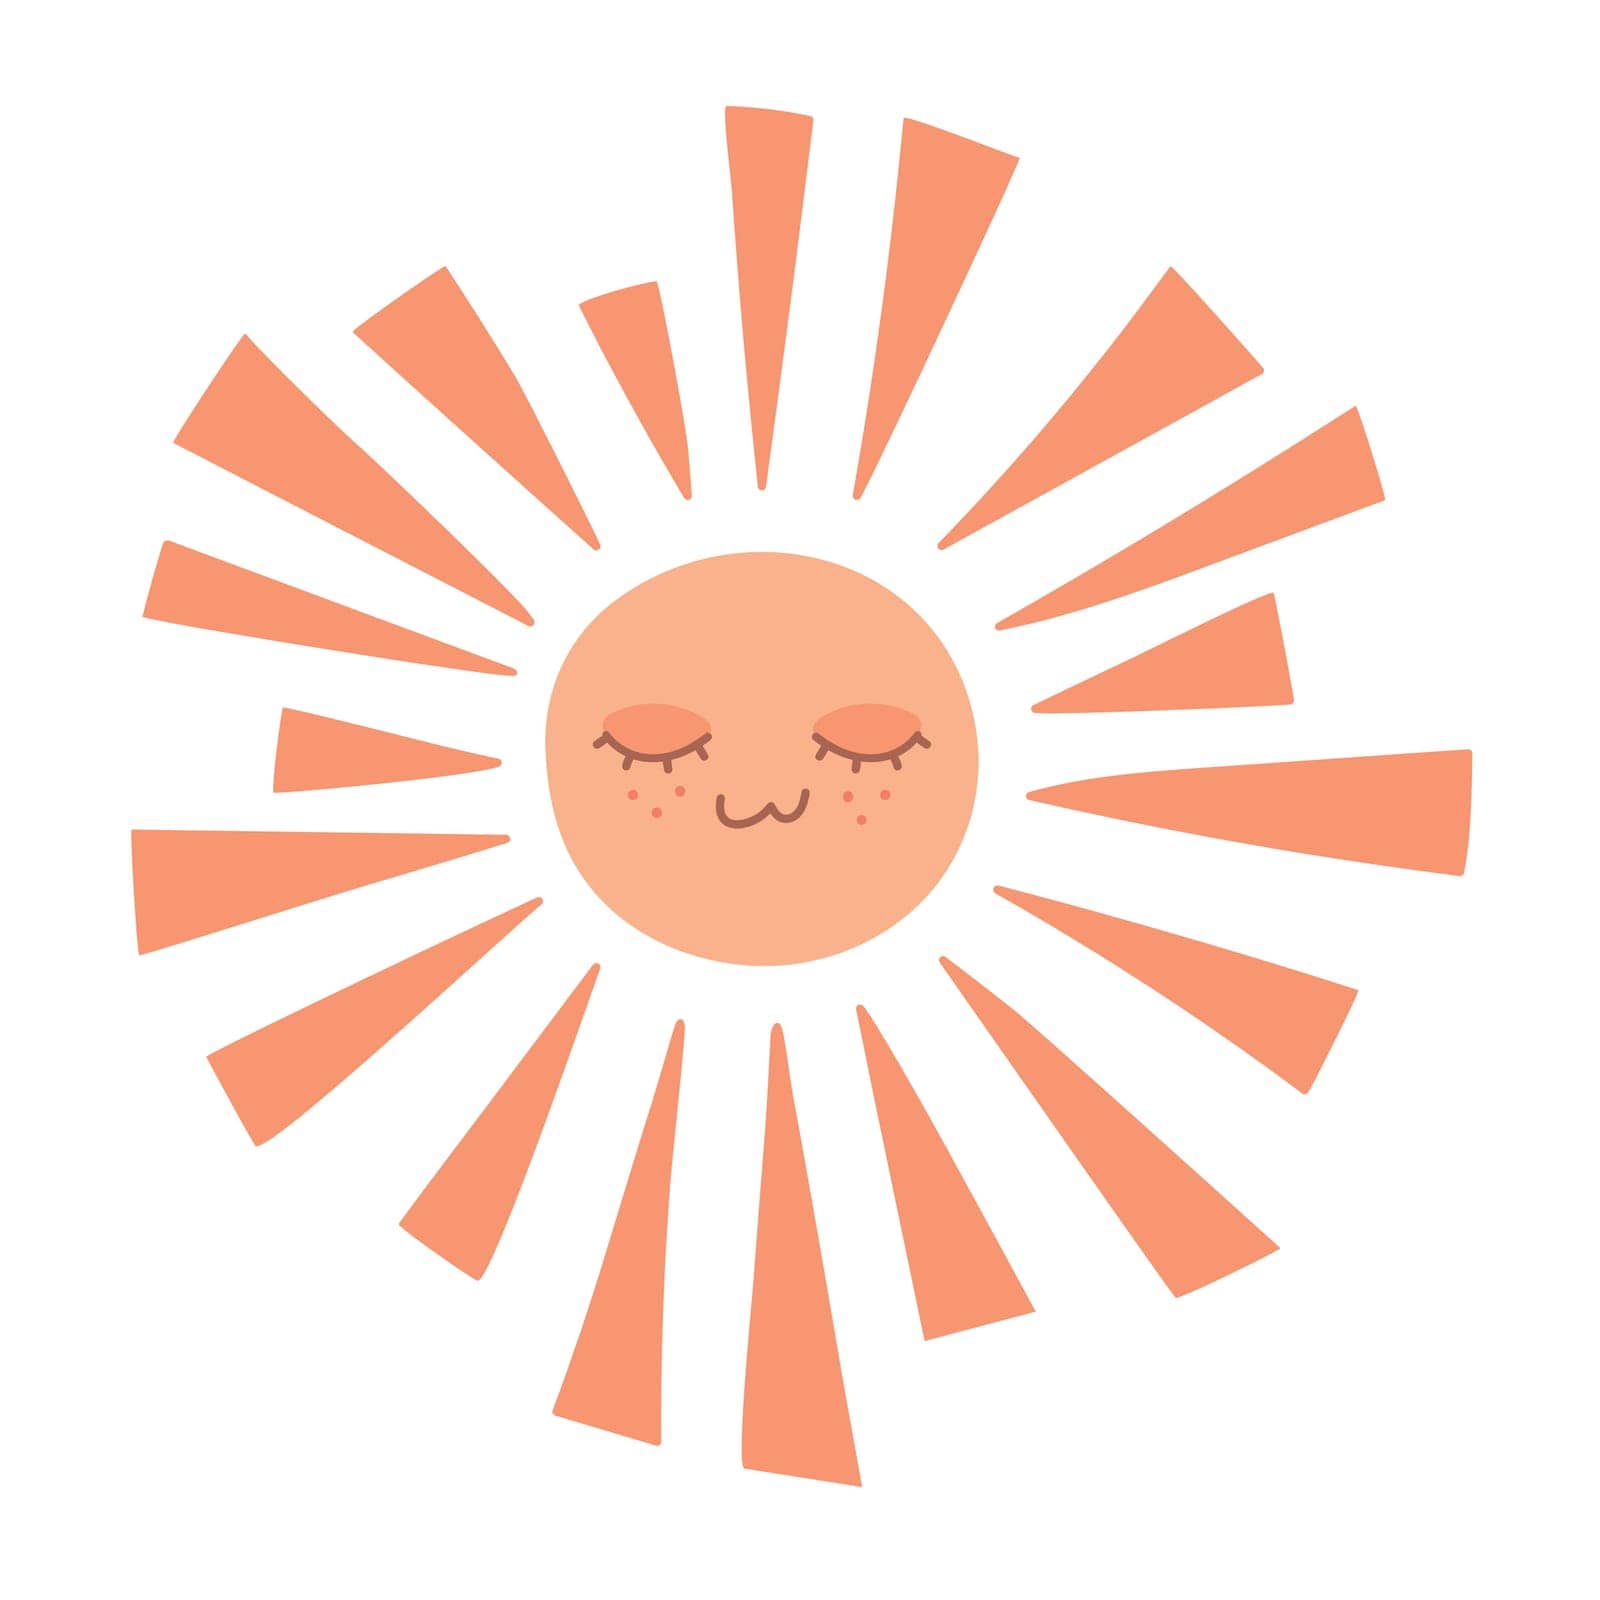 Cute hand drawn smiling sun character. Scandinavian style decoration for nursery kids room. Vector illustration  by psychoche